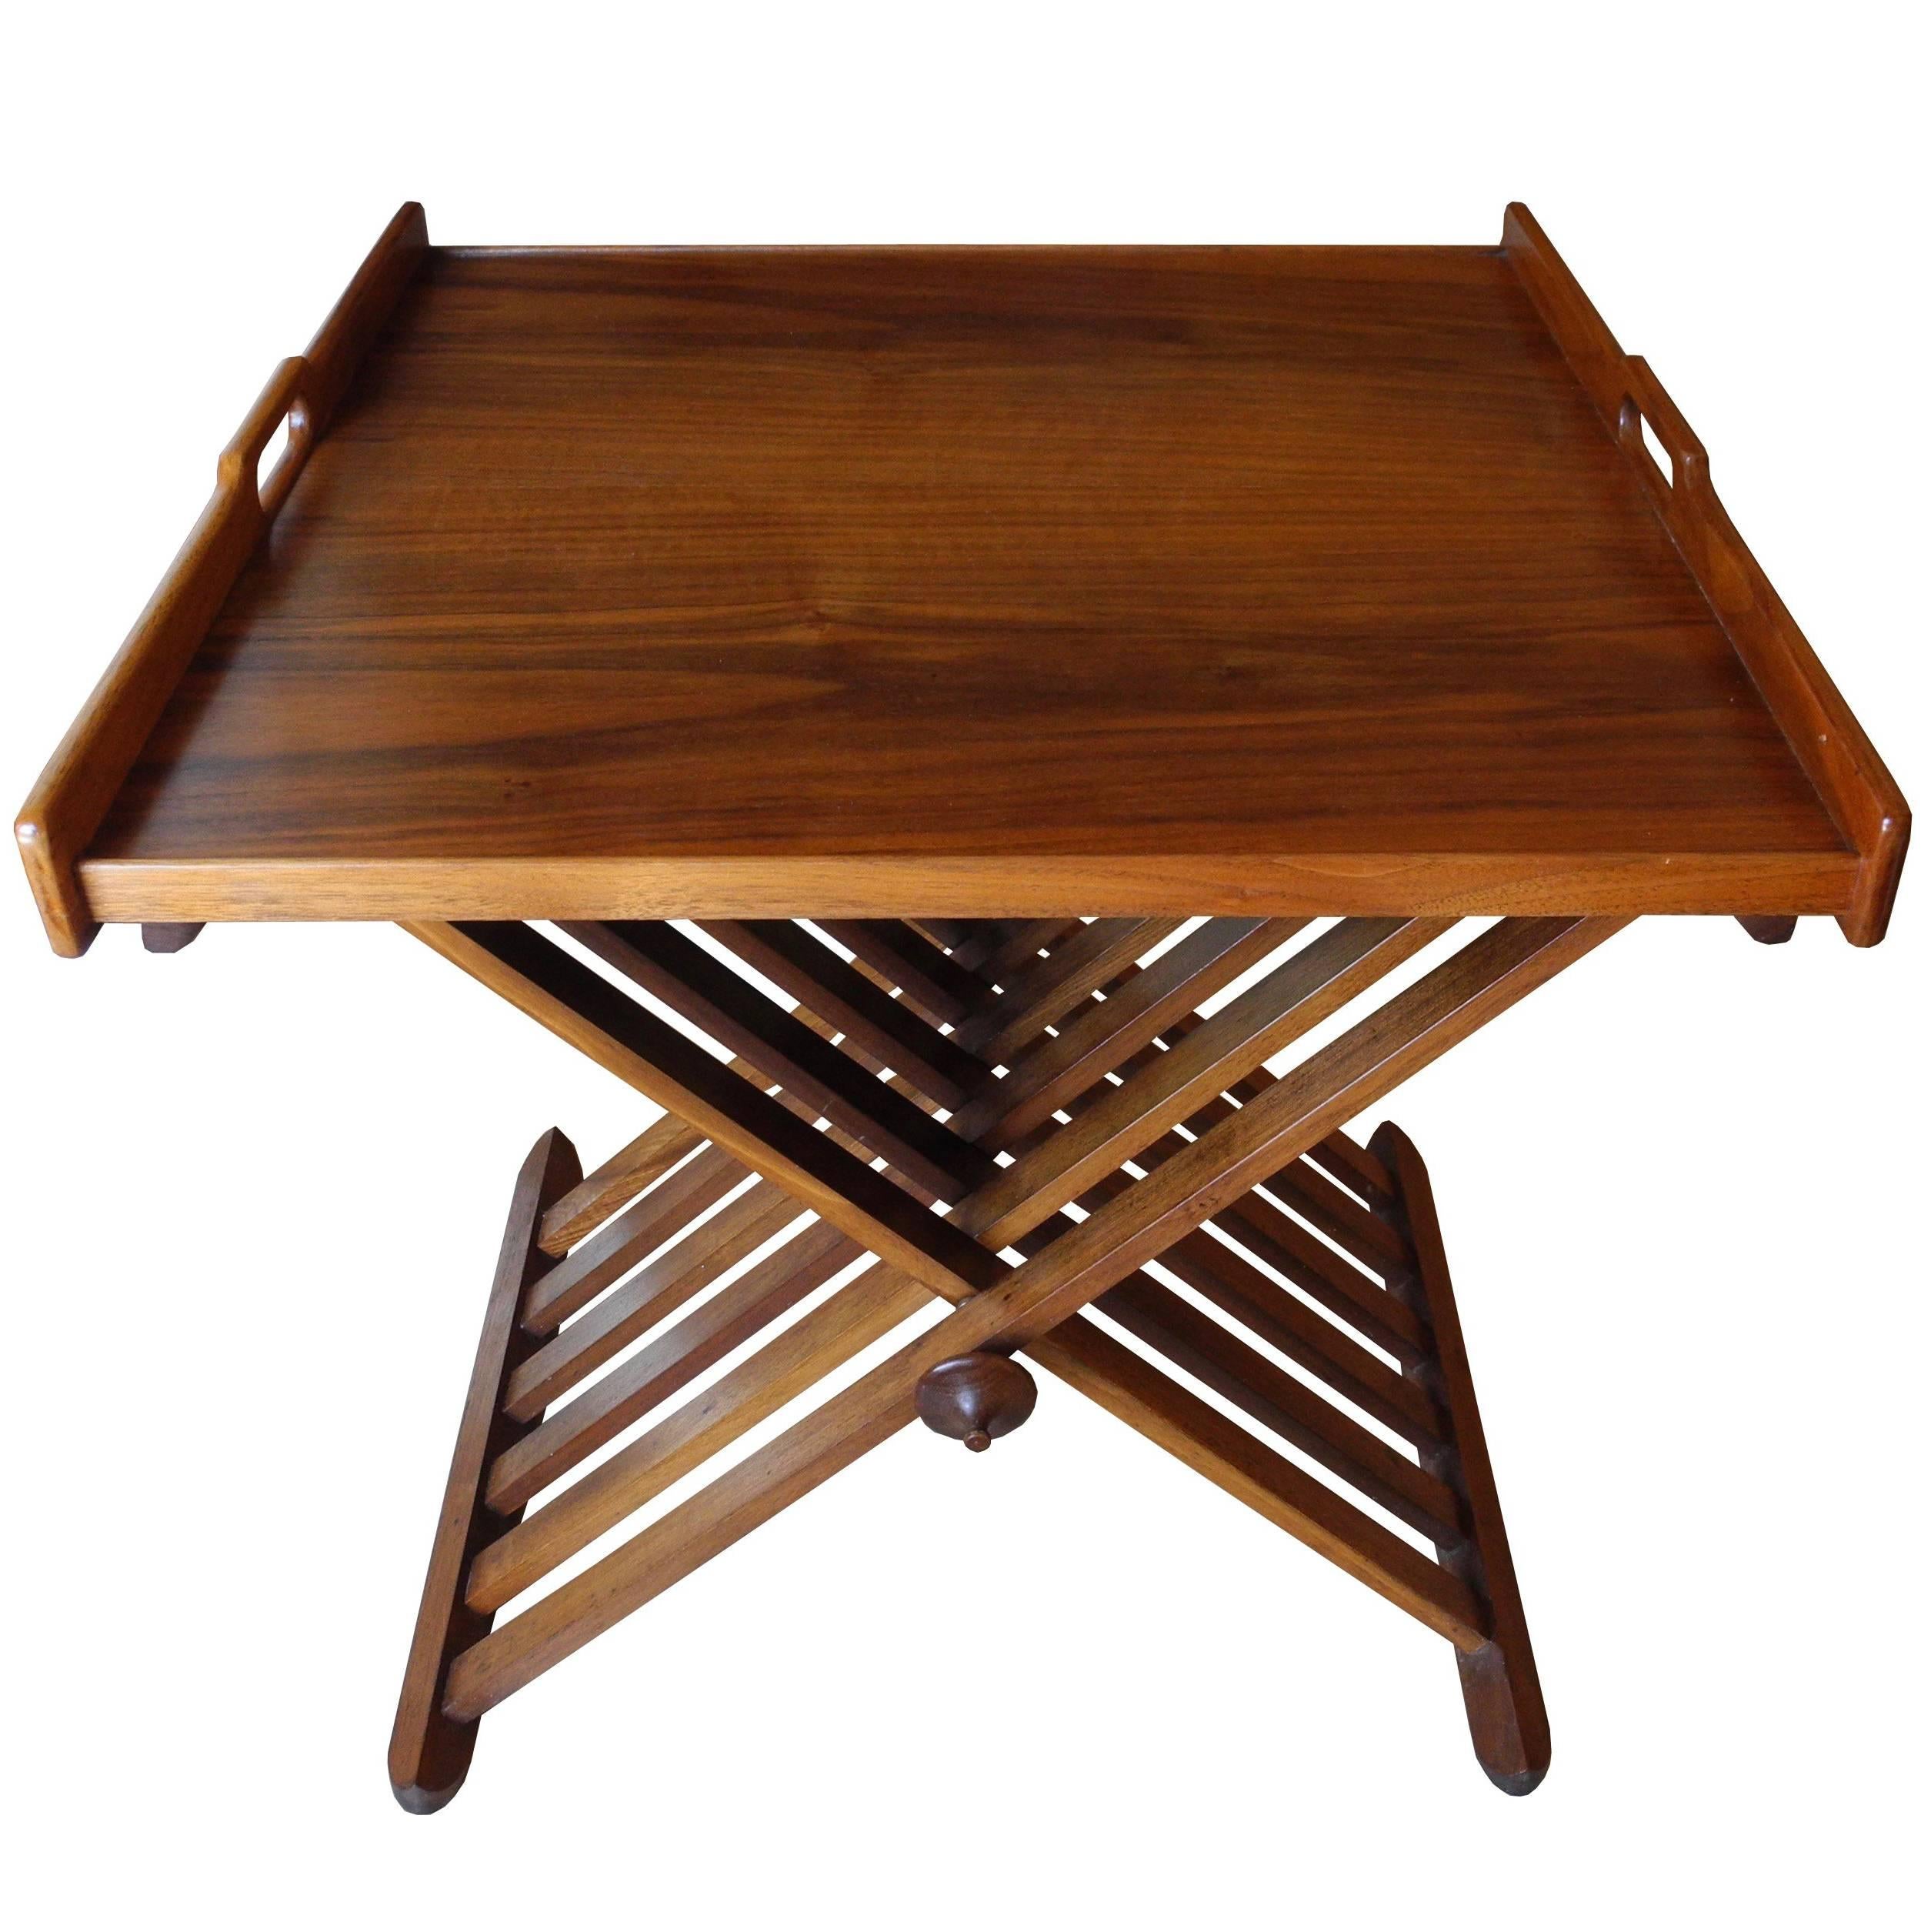 Campaign Tray Table by Stewart McDougall for Drexel in Walnut For Sale